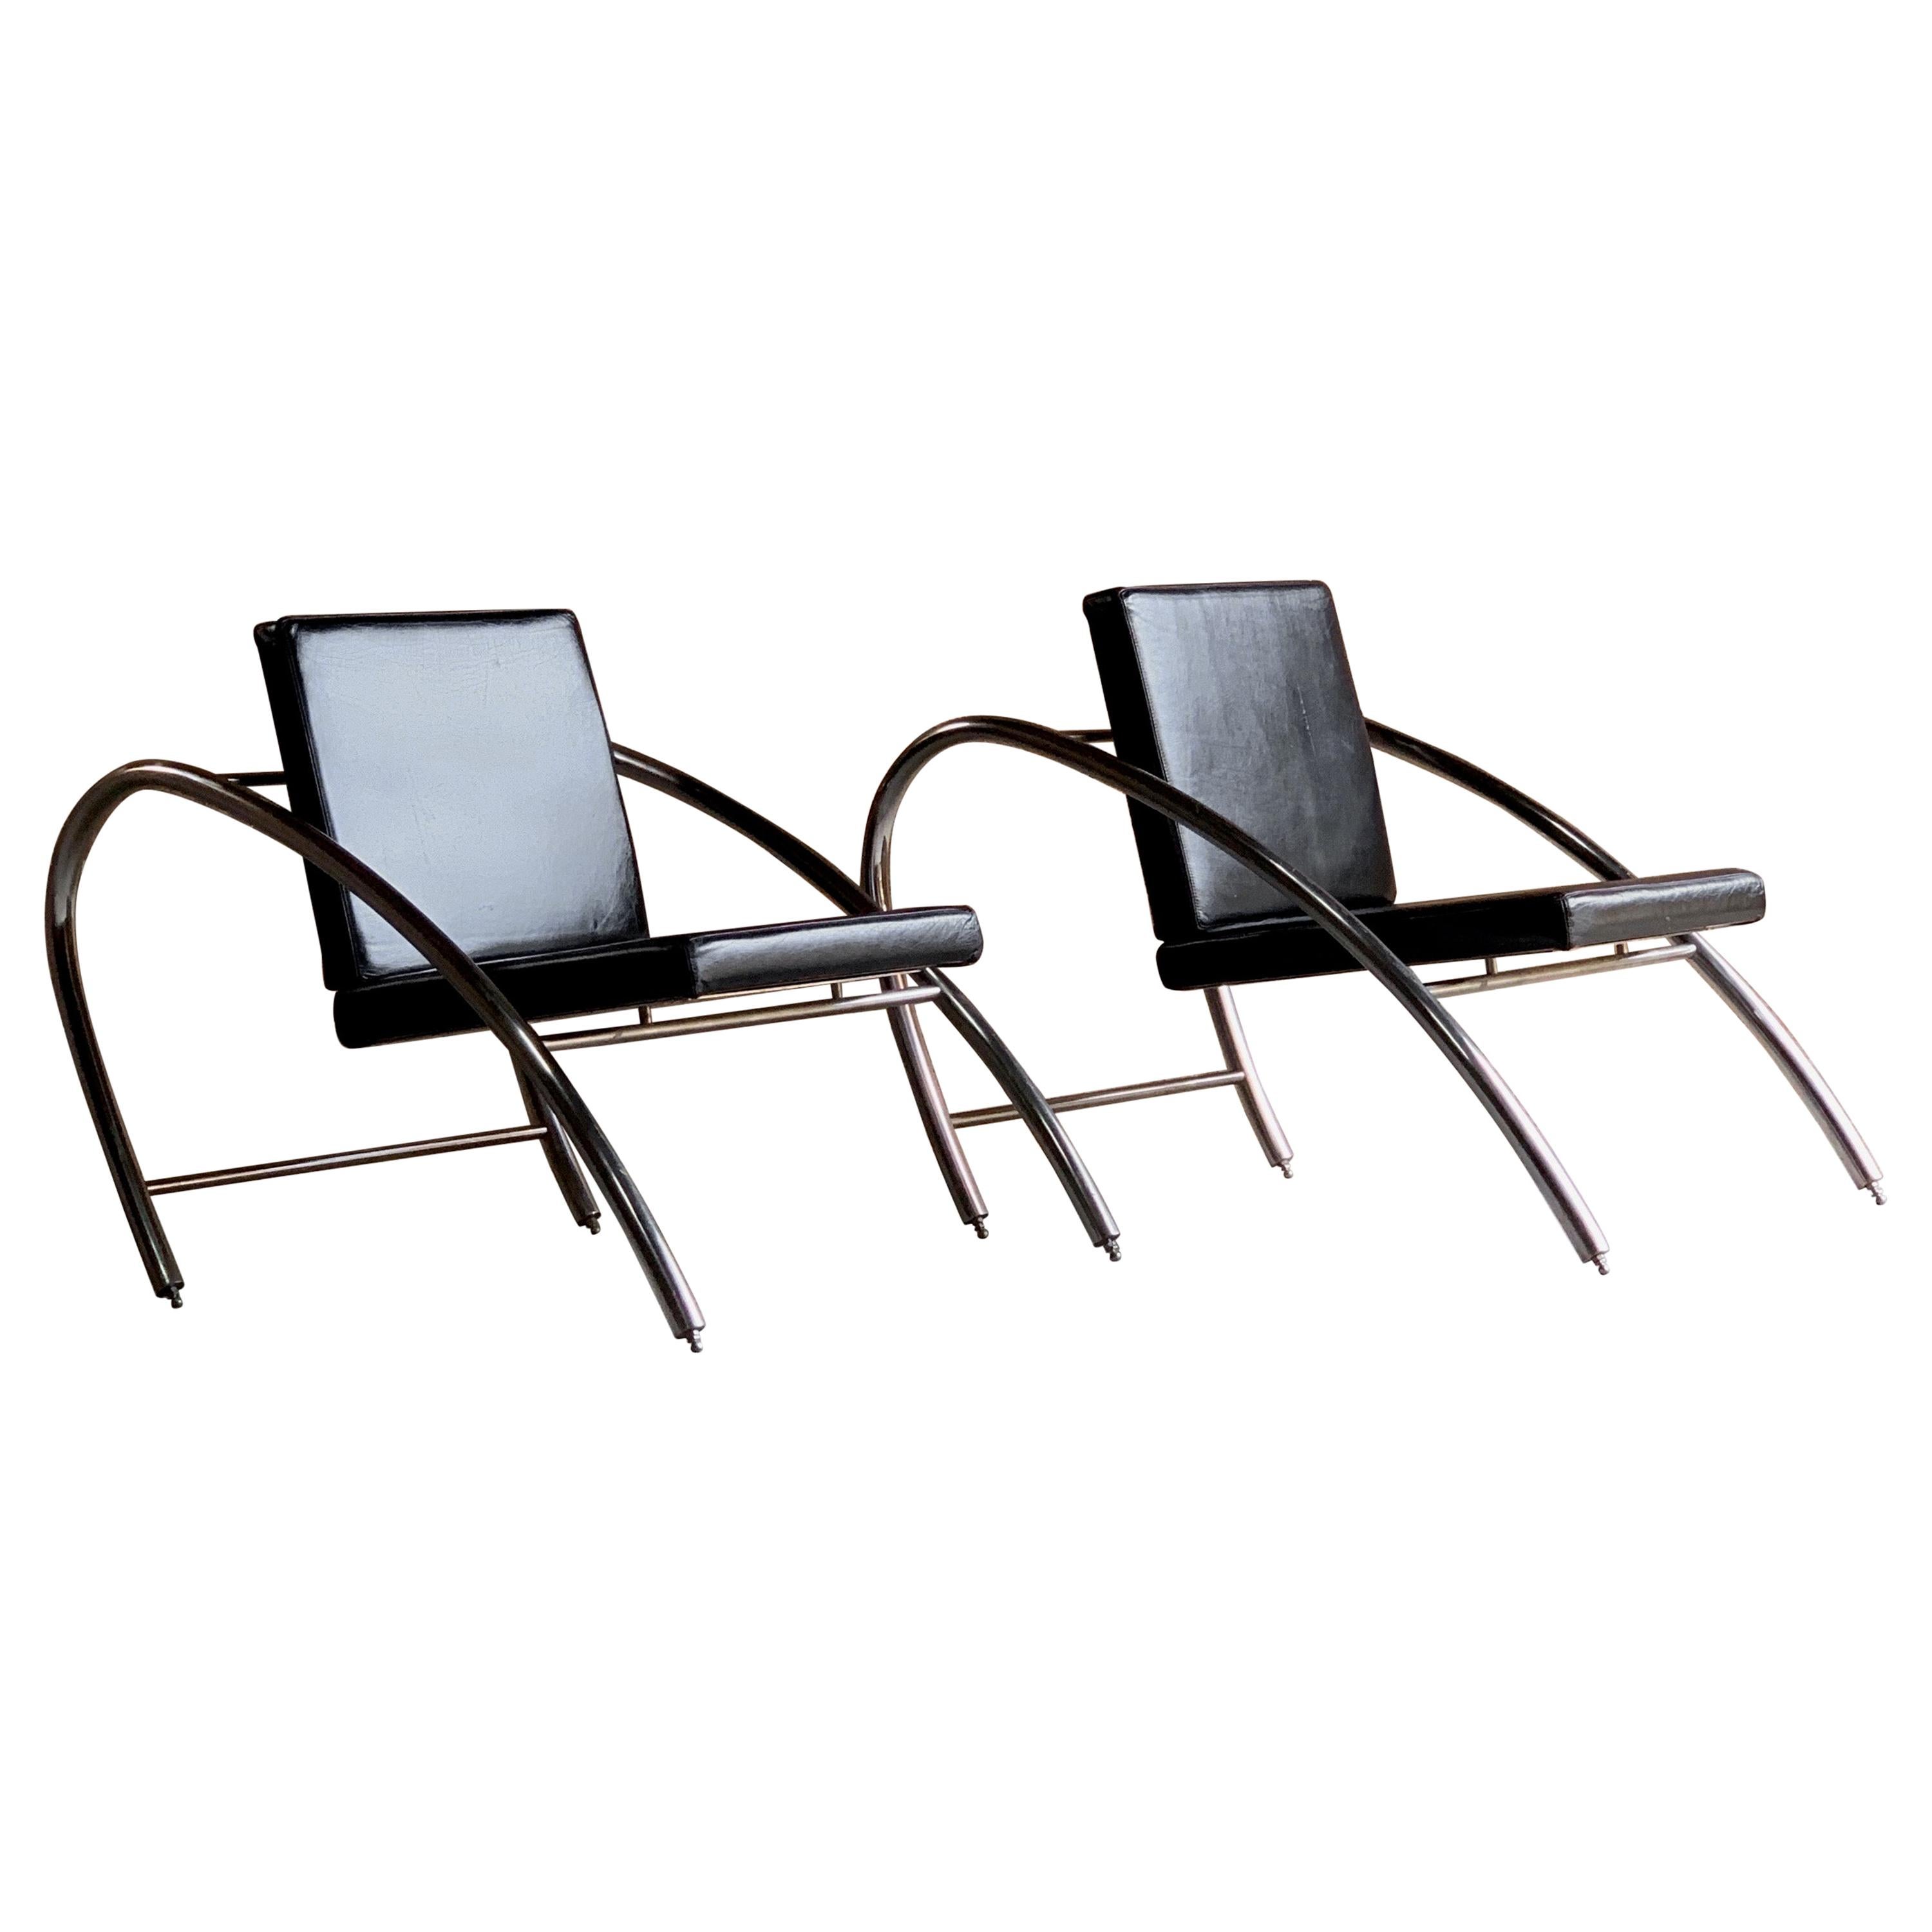 Moreno Chrome & Leather Lounge Chairs by Francois Scali & Alain Domingo for Nemo